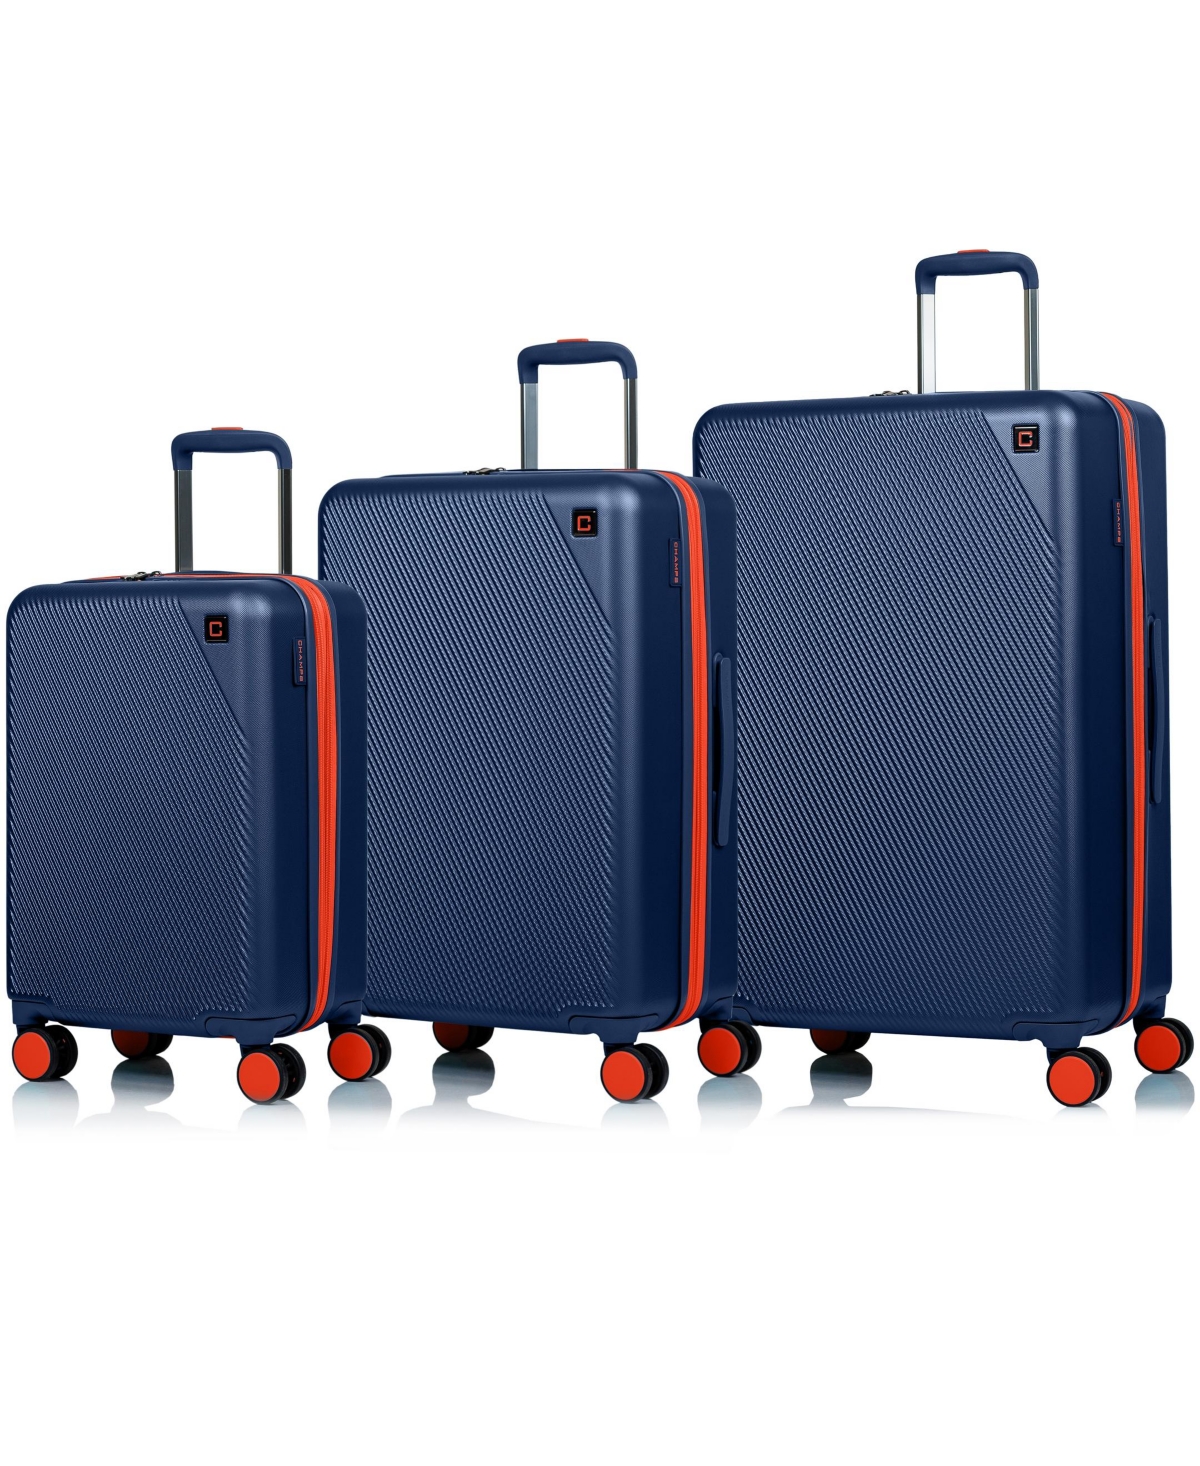 Champs 3-piece Fresh Hardside Luggage Set In Navy